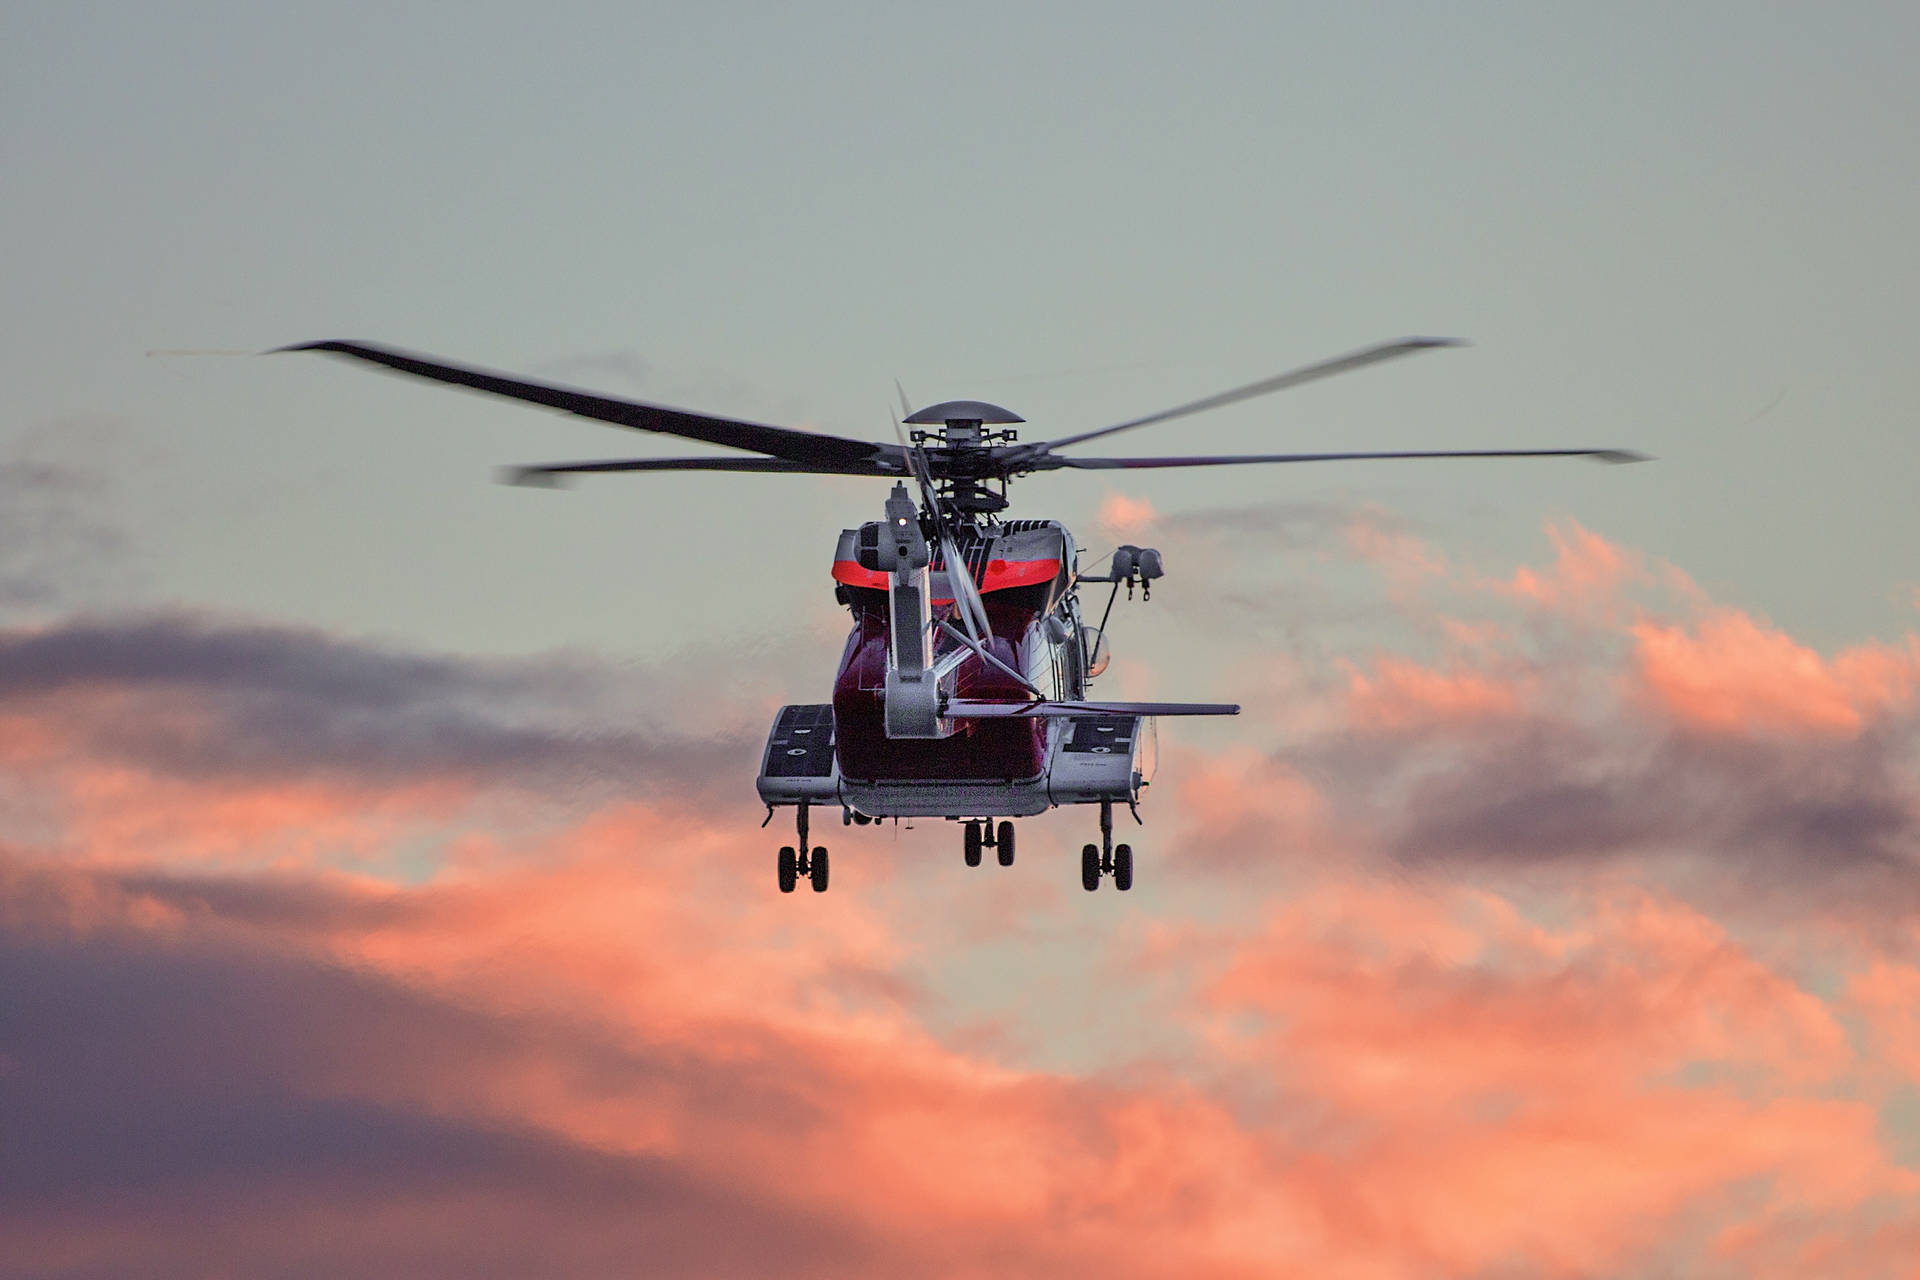 Free Helicopter 4k Wallpaper Downloads, [100+] Helicopter 4k Wallpapers for  FREE 